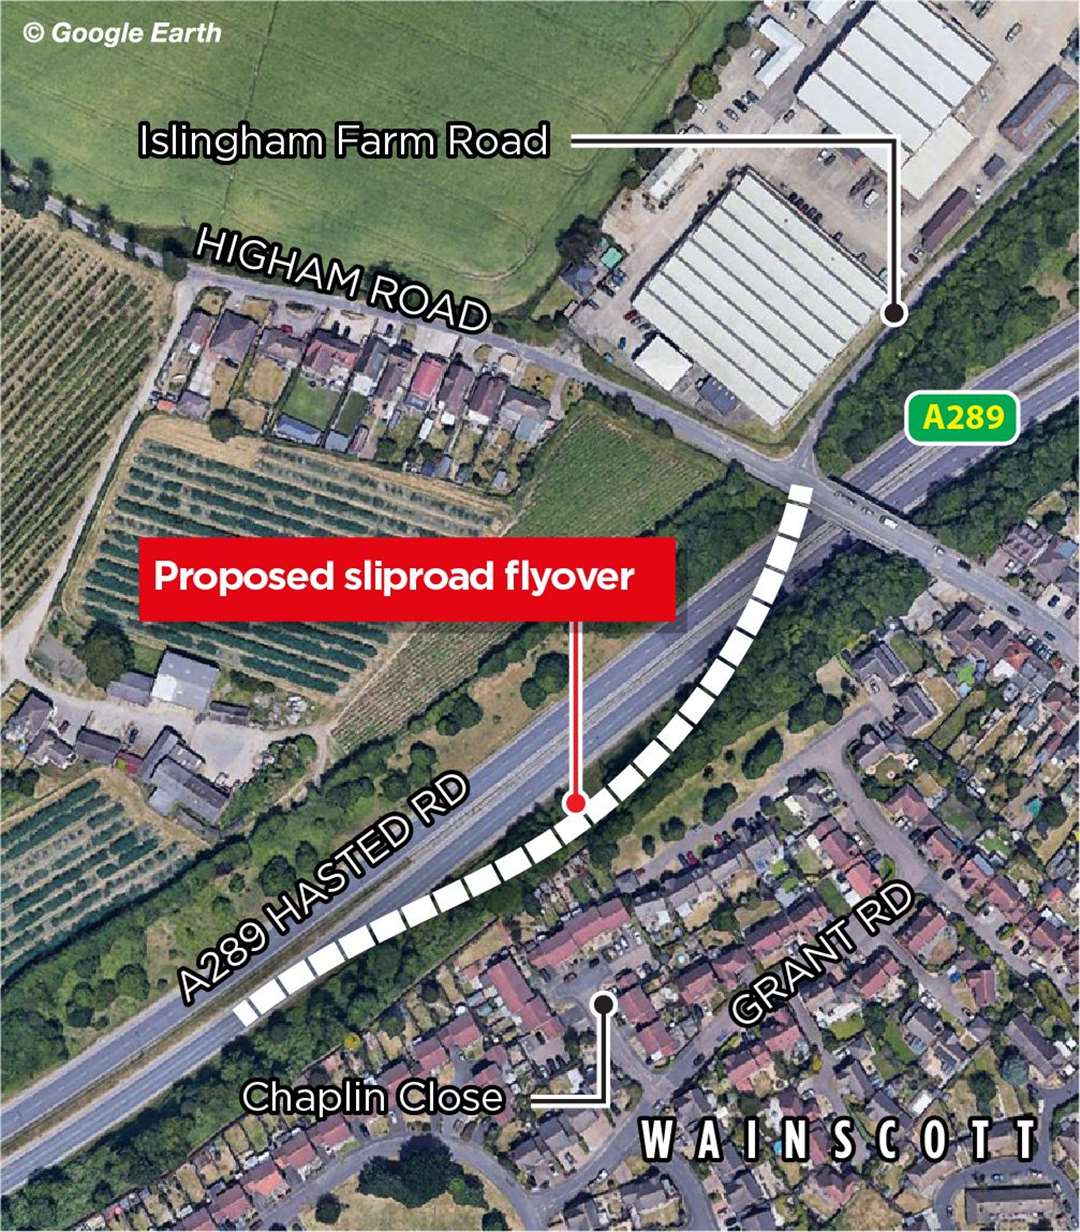 Map showing the location of the proposed flyover at Wainscott